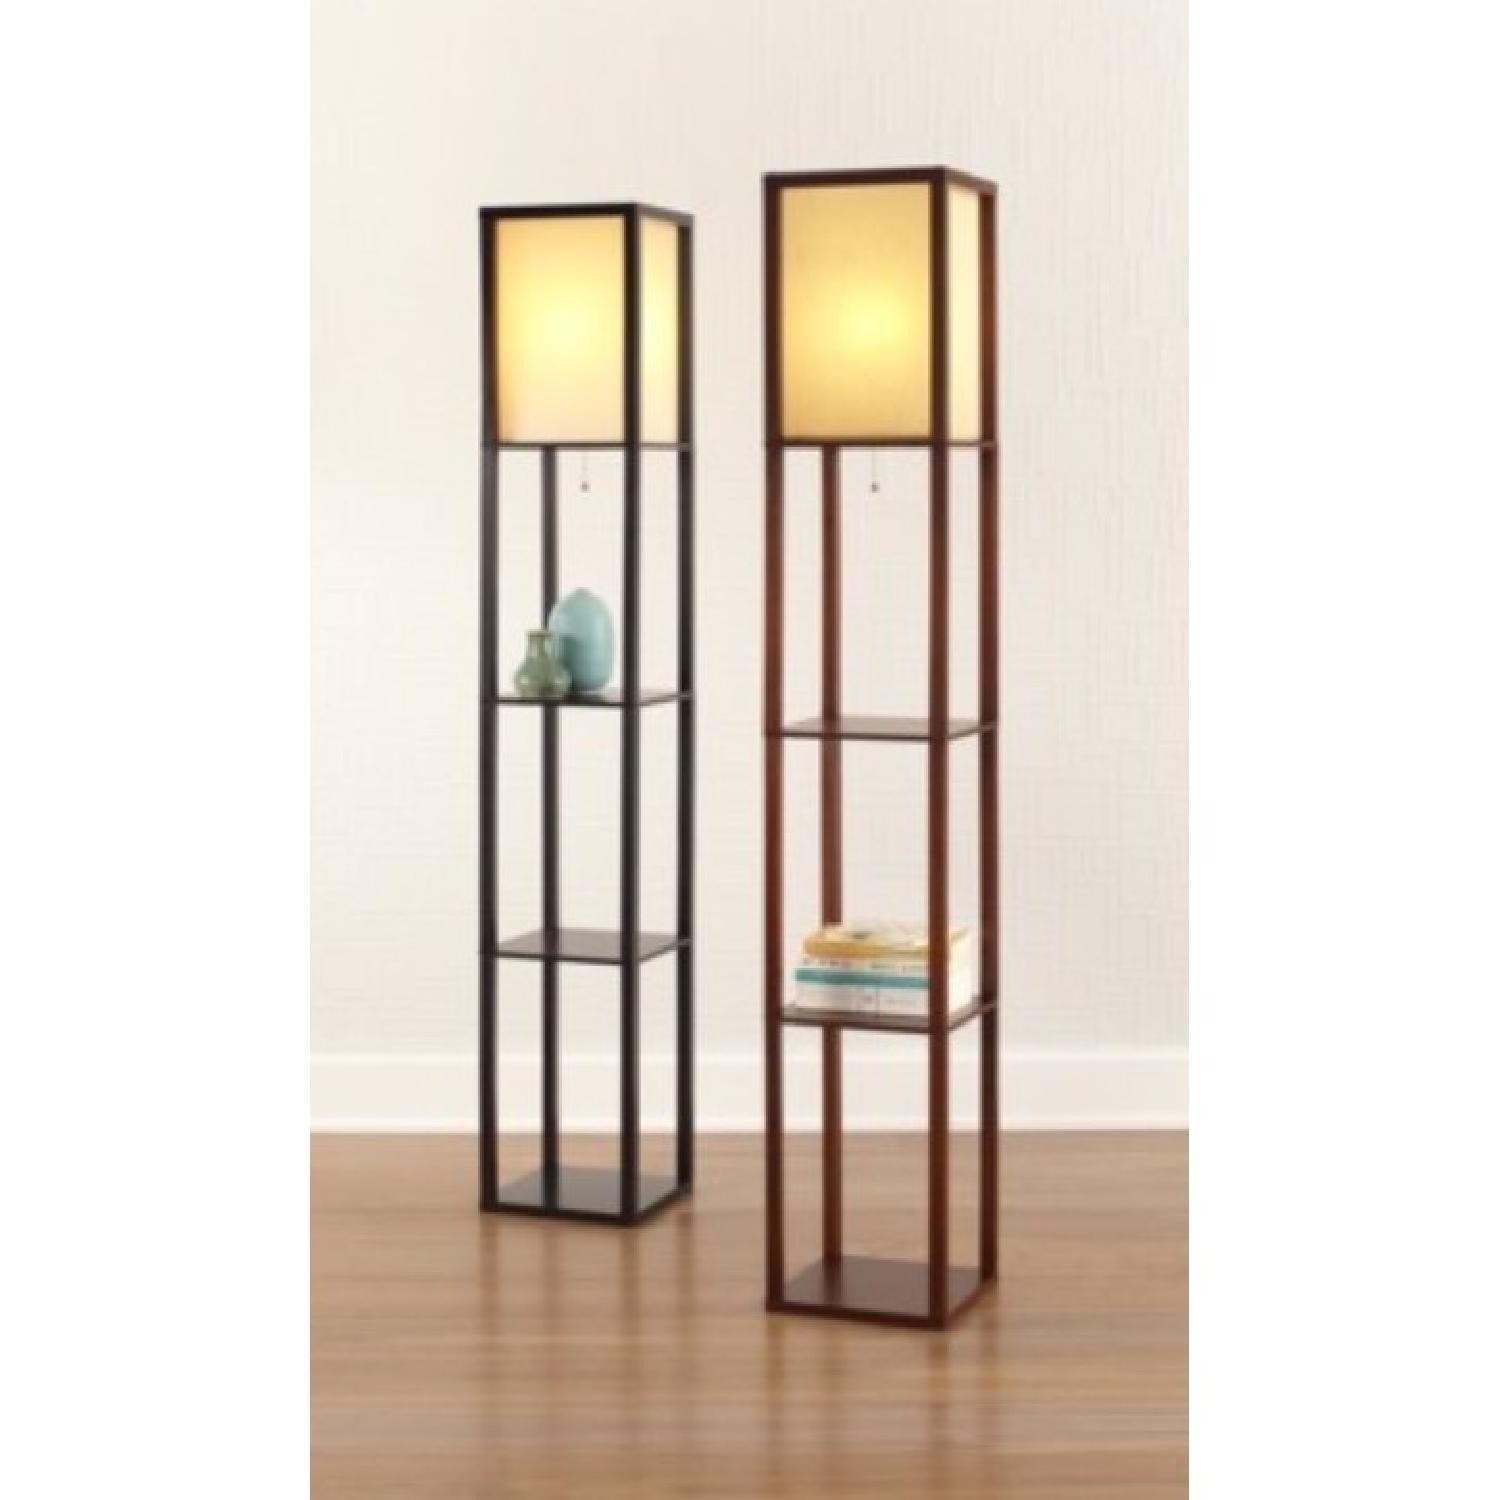 Threshold tm floor shelf lamp with ivory shade product details